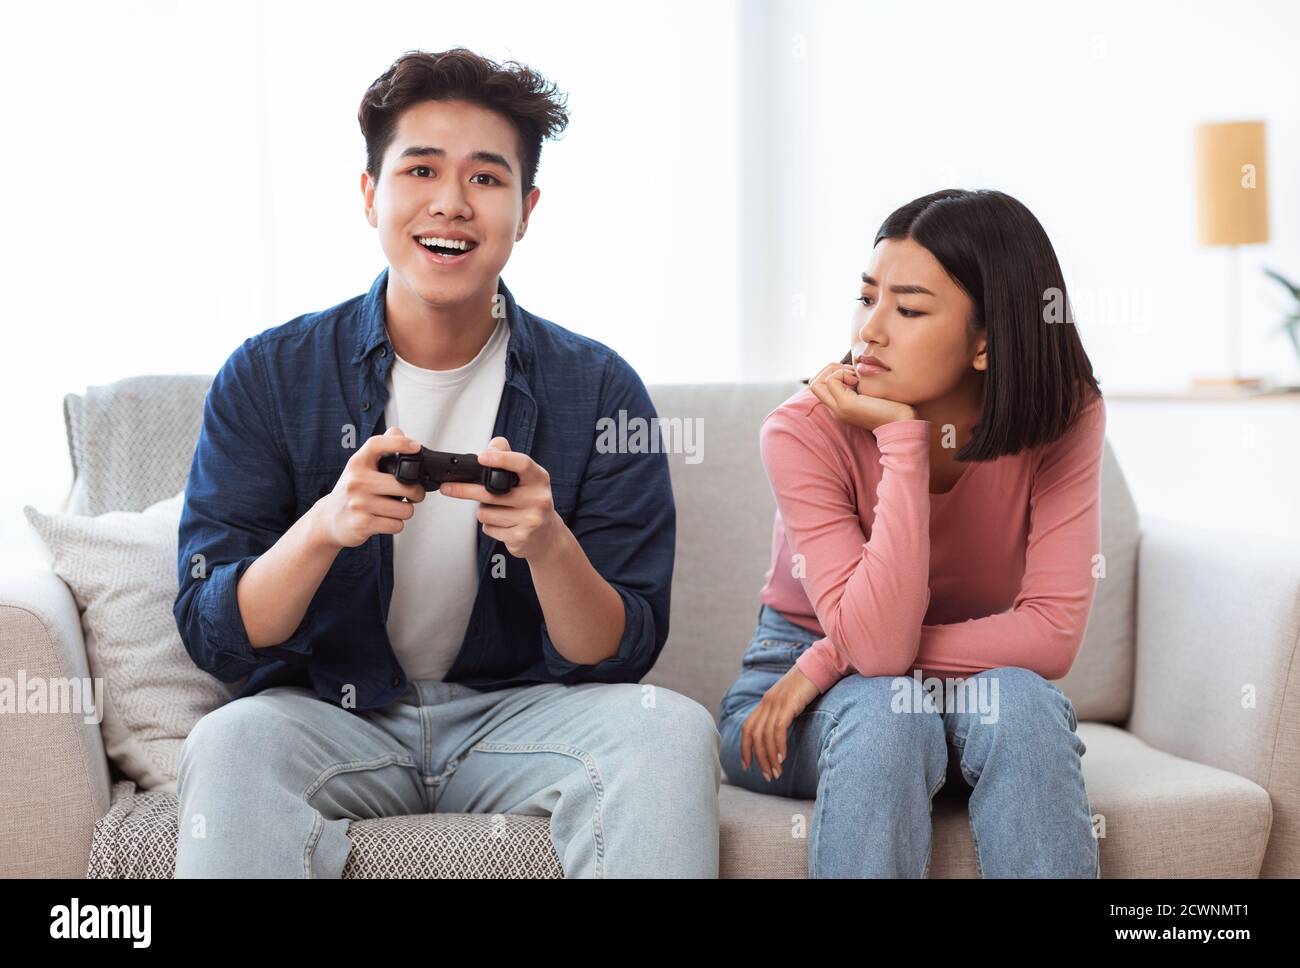 Discontented Asian Wife Looking At Husband Playing Video Game Indoors Stock Photo